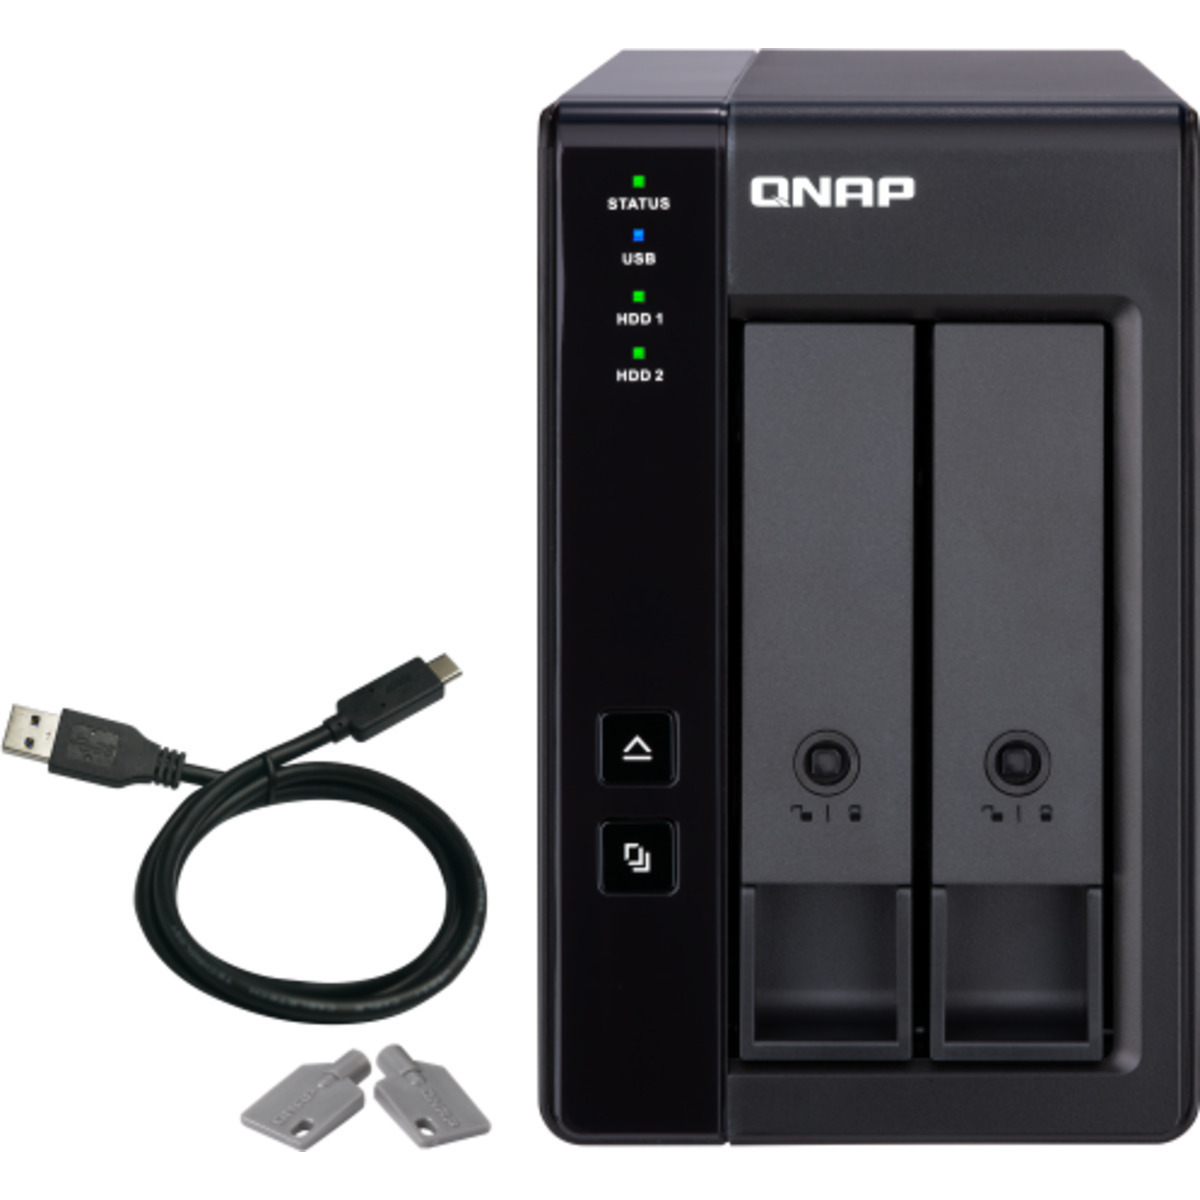 buy QNAP TR-002 External Expansion Drive 12tb Desktop Expansion Enclosure 2x6000gb Western Digital Red WD60EFAX 3.5 5400rpm SATA 6Gb/s HDD NAS Class Drives Installed - Burn-In Tested - ON SALE - nas headquarters buy network attached storage server device das new raid-5 free shipping simply usa TR-002 External Expansion Drive